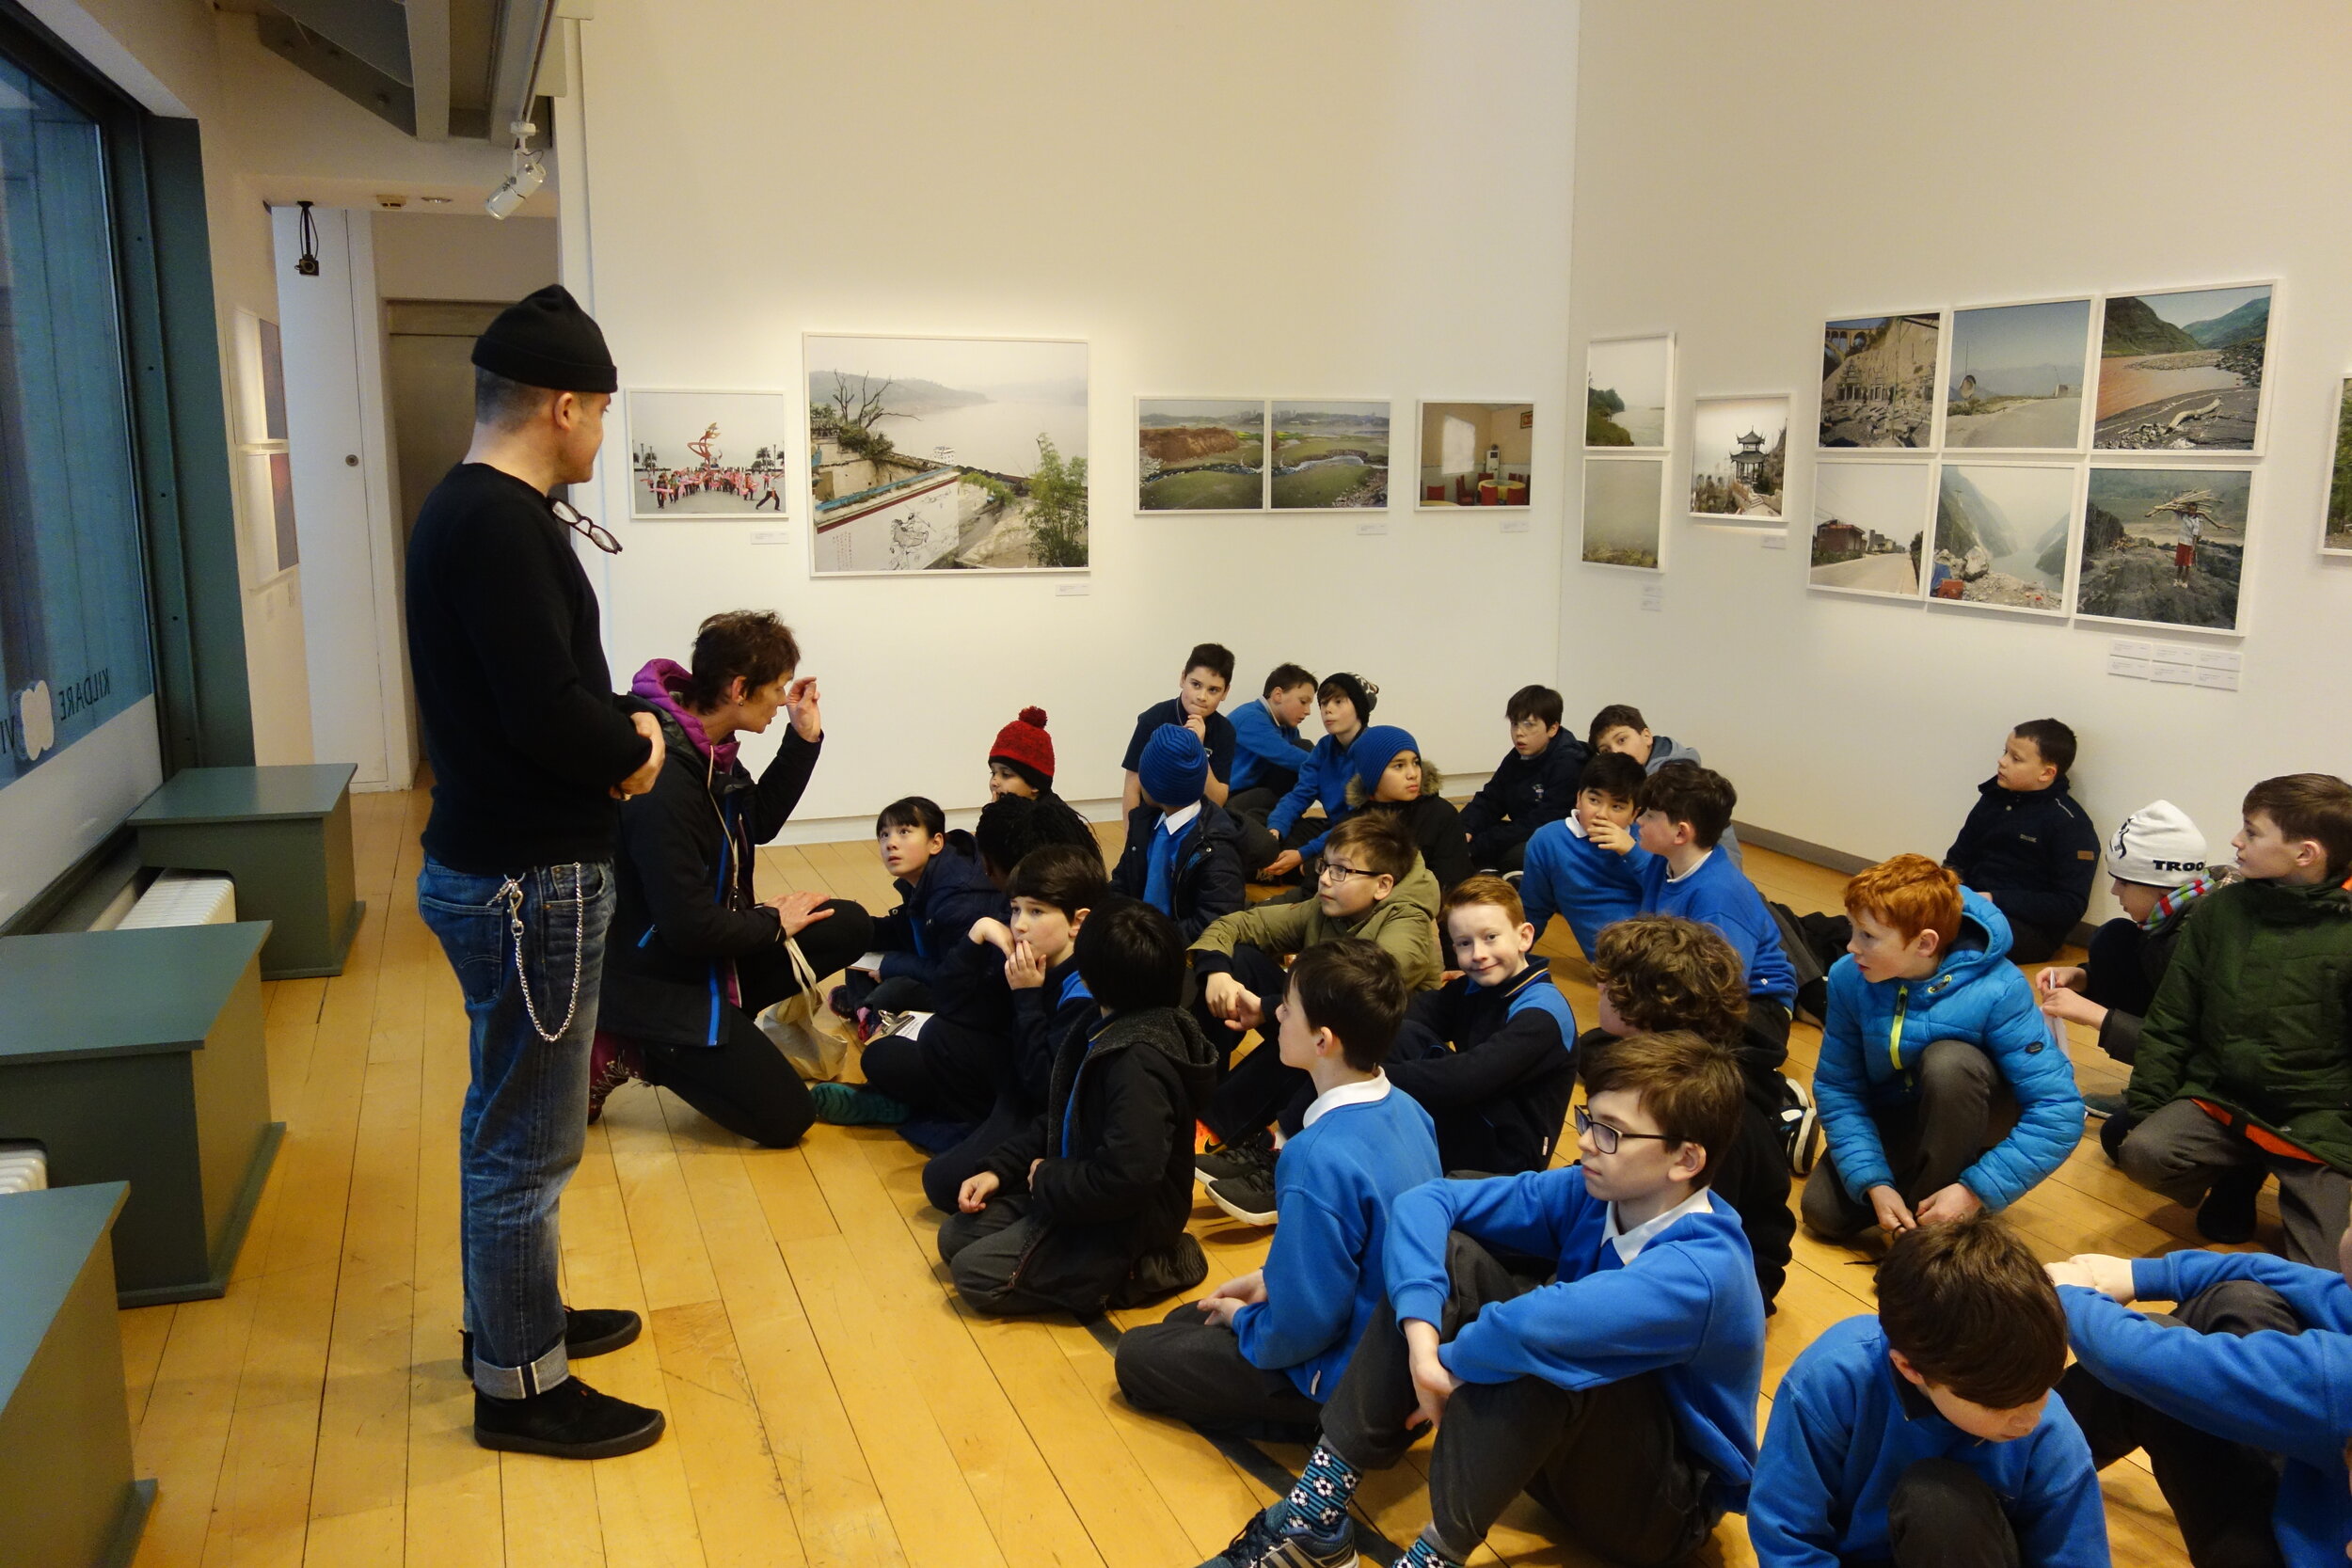  Communications Manager Darragh Shanahan giving a tour of the exhibition to school pupils  